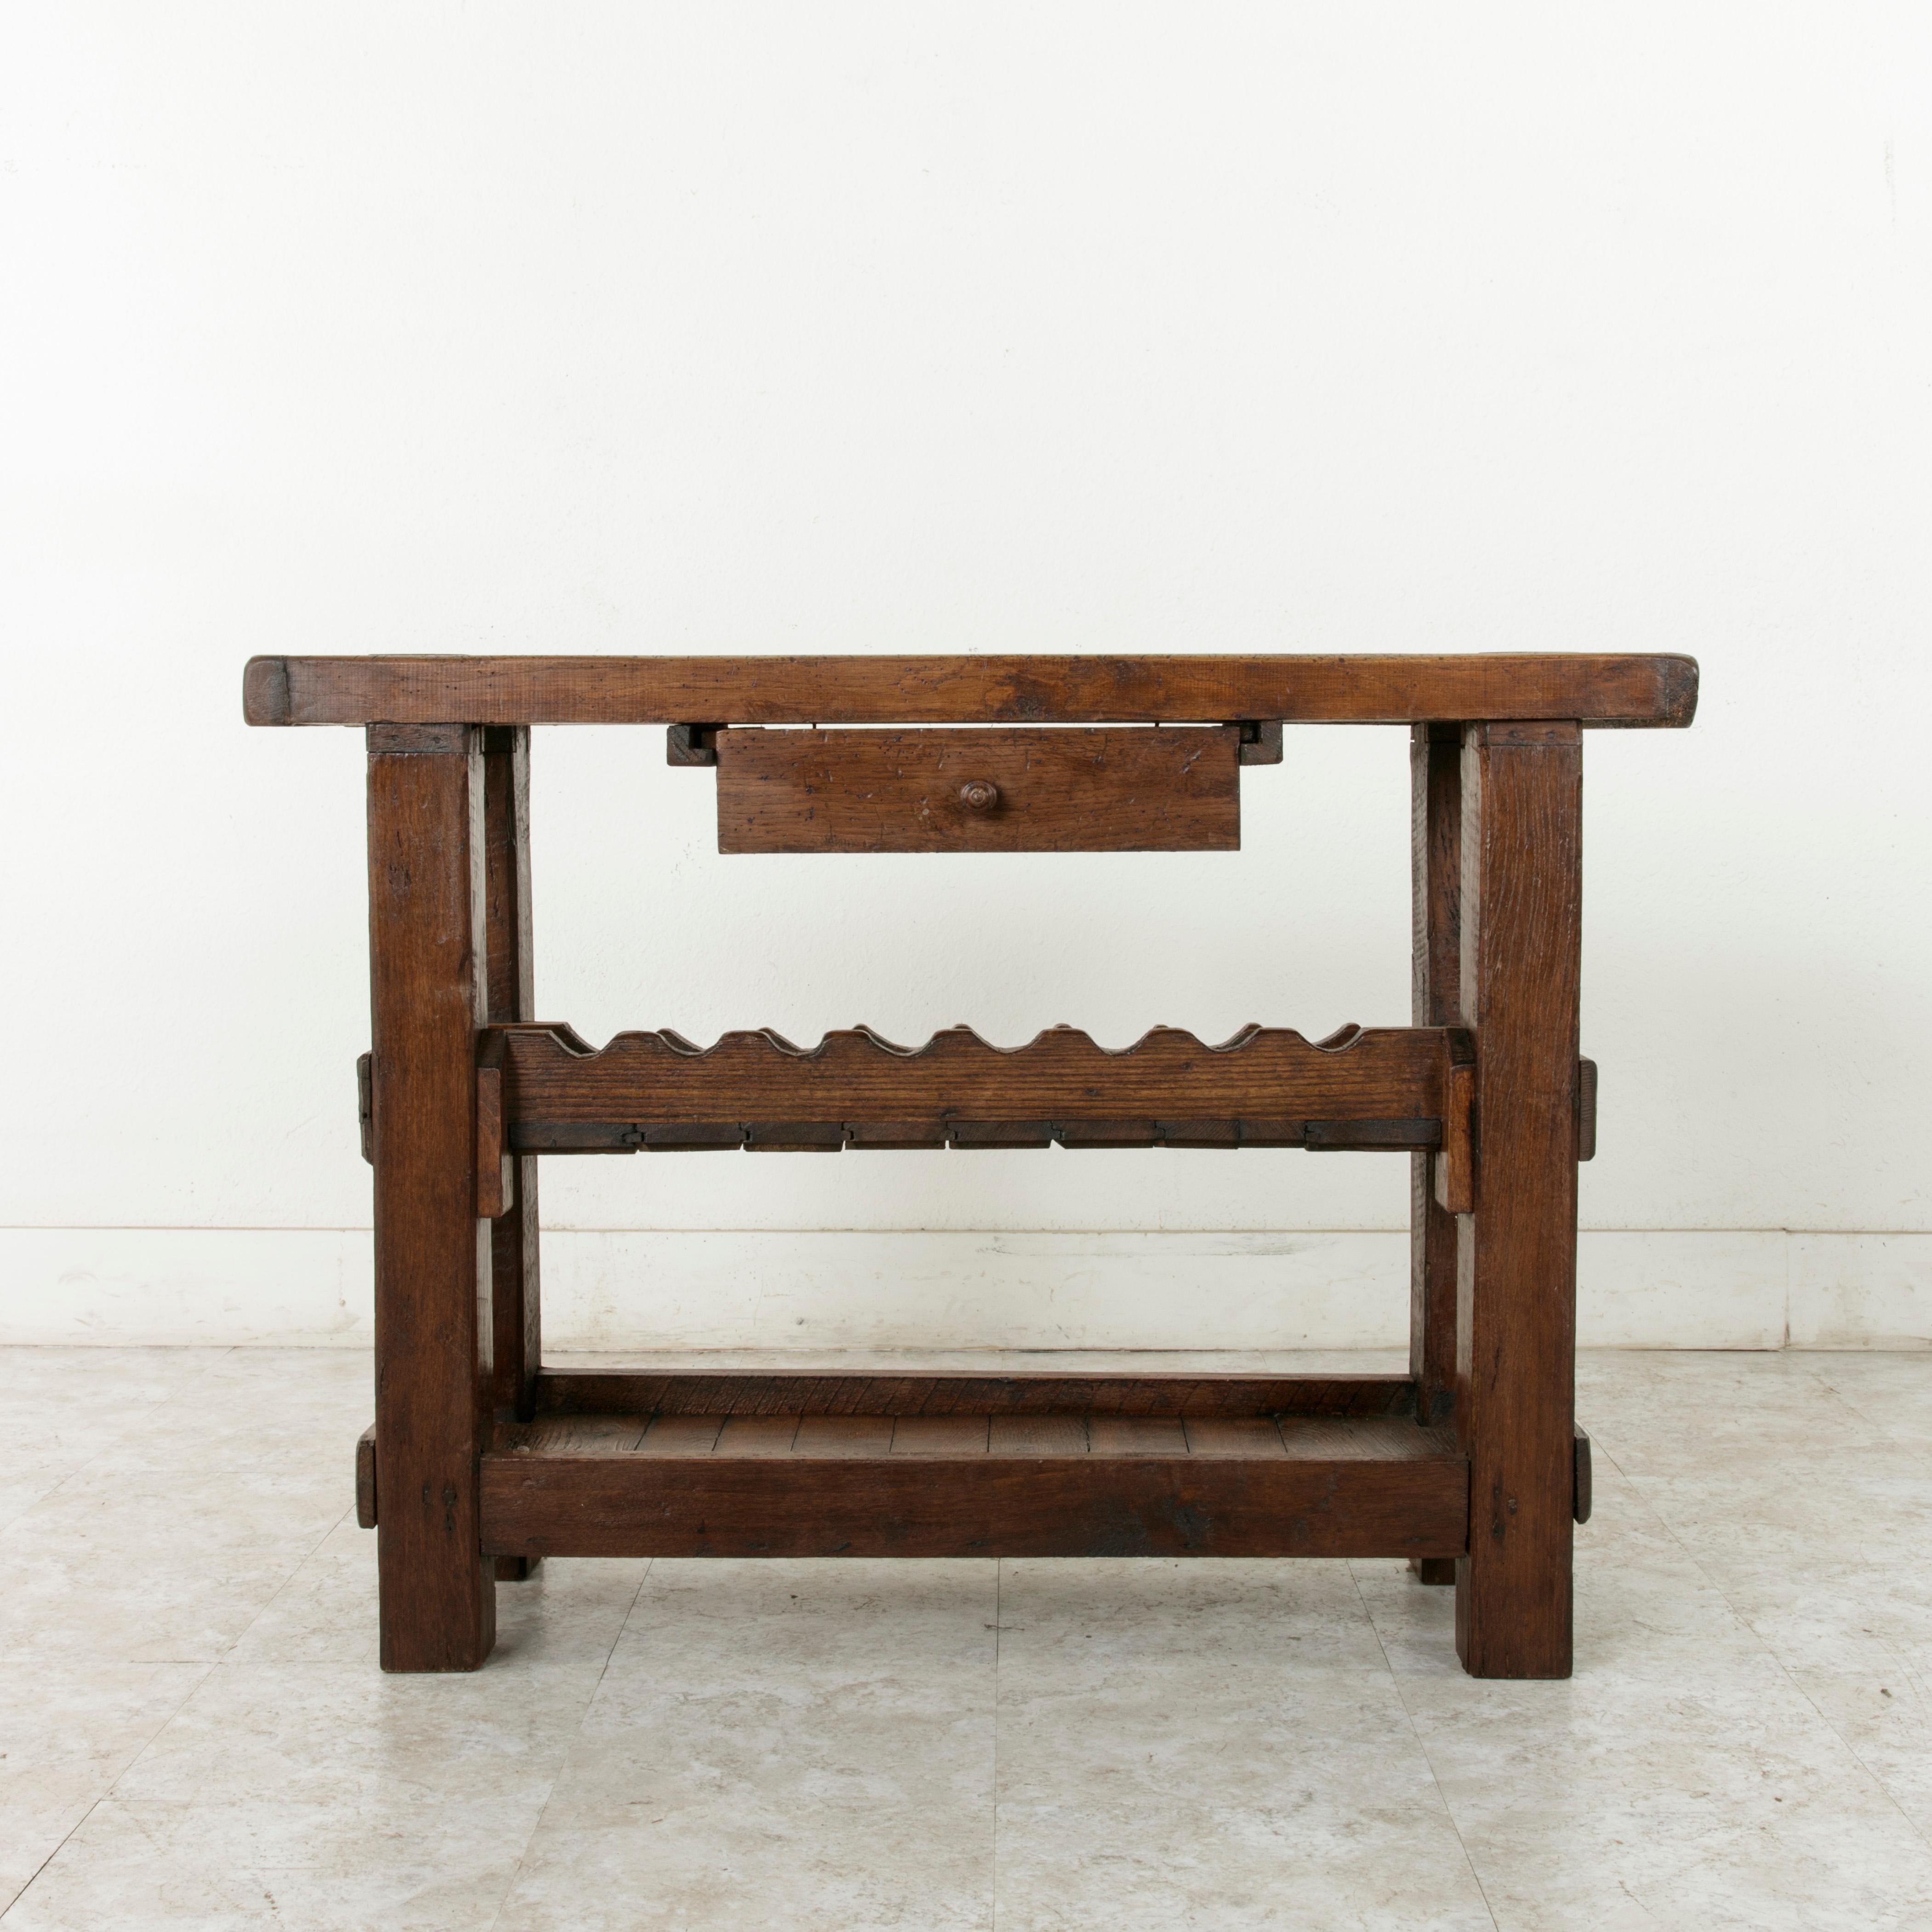 This early 20th century French oak workbench from Normandy, France, features the engraved name of the original owner, M. Mauduit, in the lower left corner of its two inch thick top. Two slots at the back of the top once kept the artisan's tools